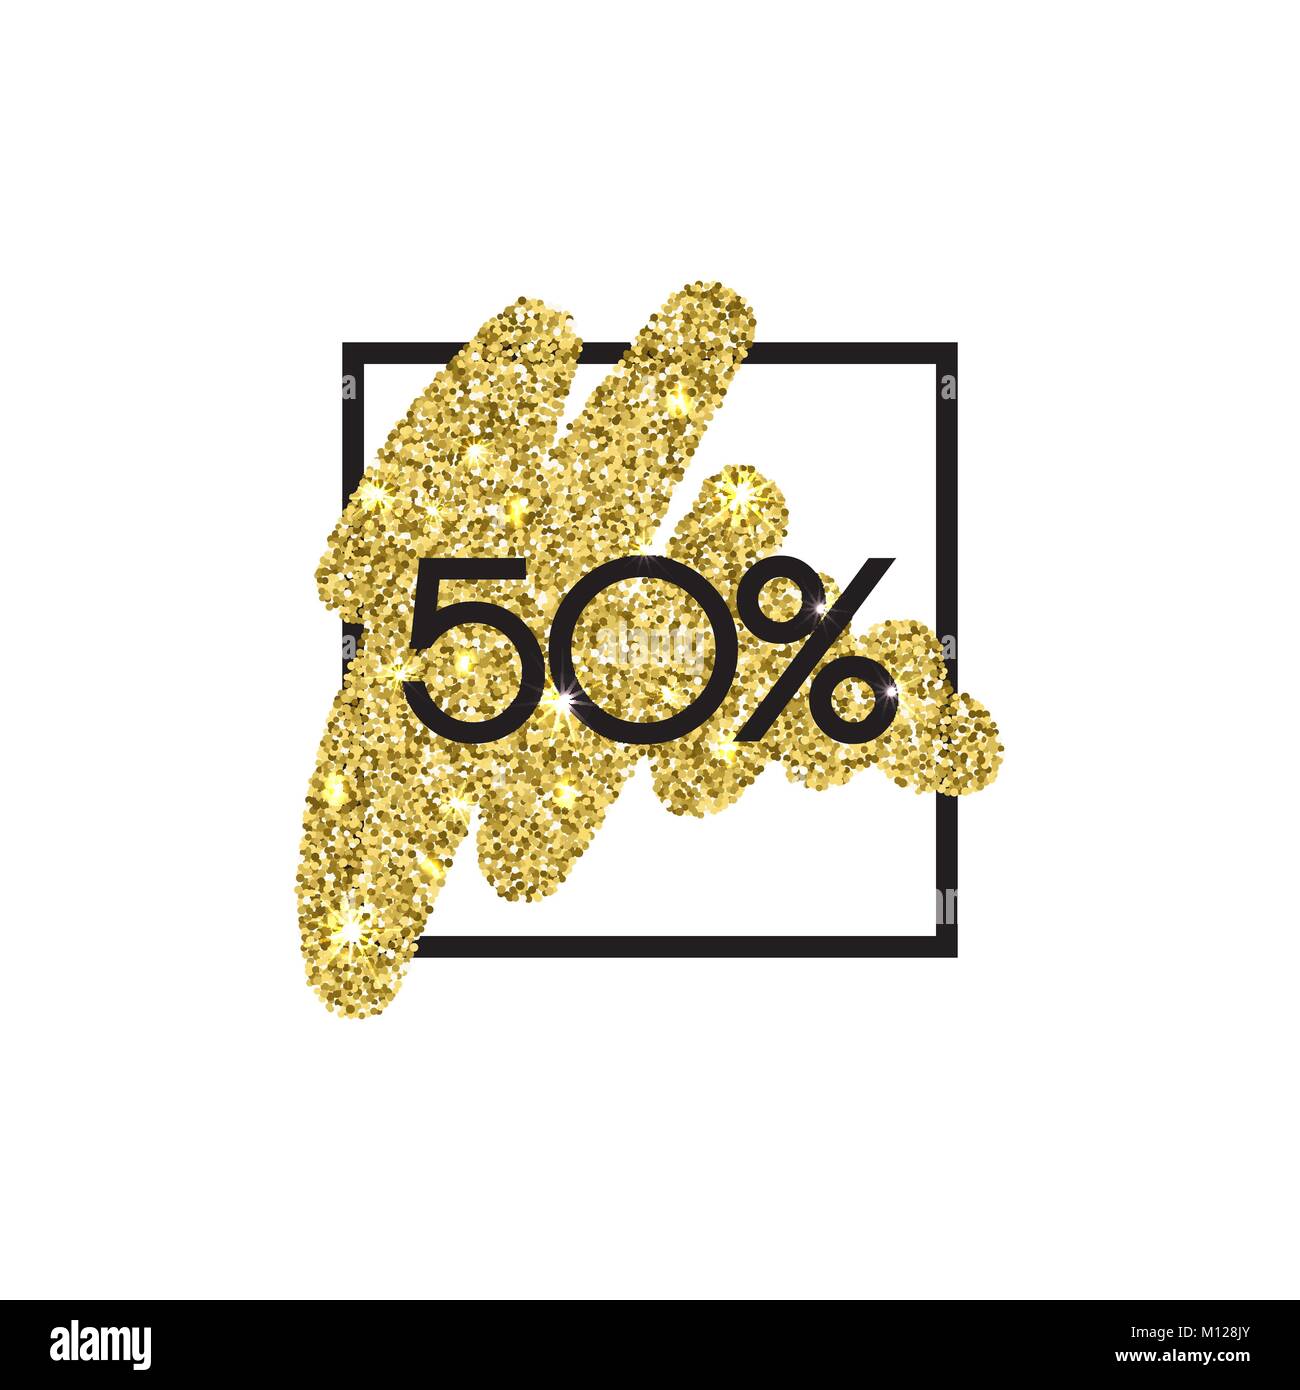 50 percent off illustration hi-res stock photography and images - Page 2 -  Alamy